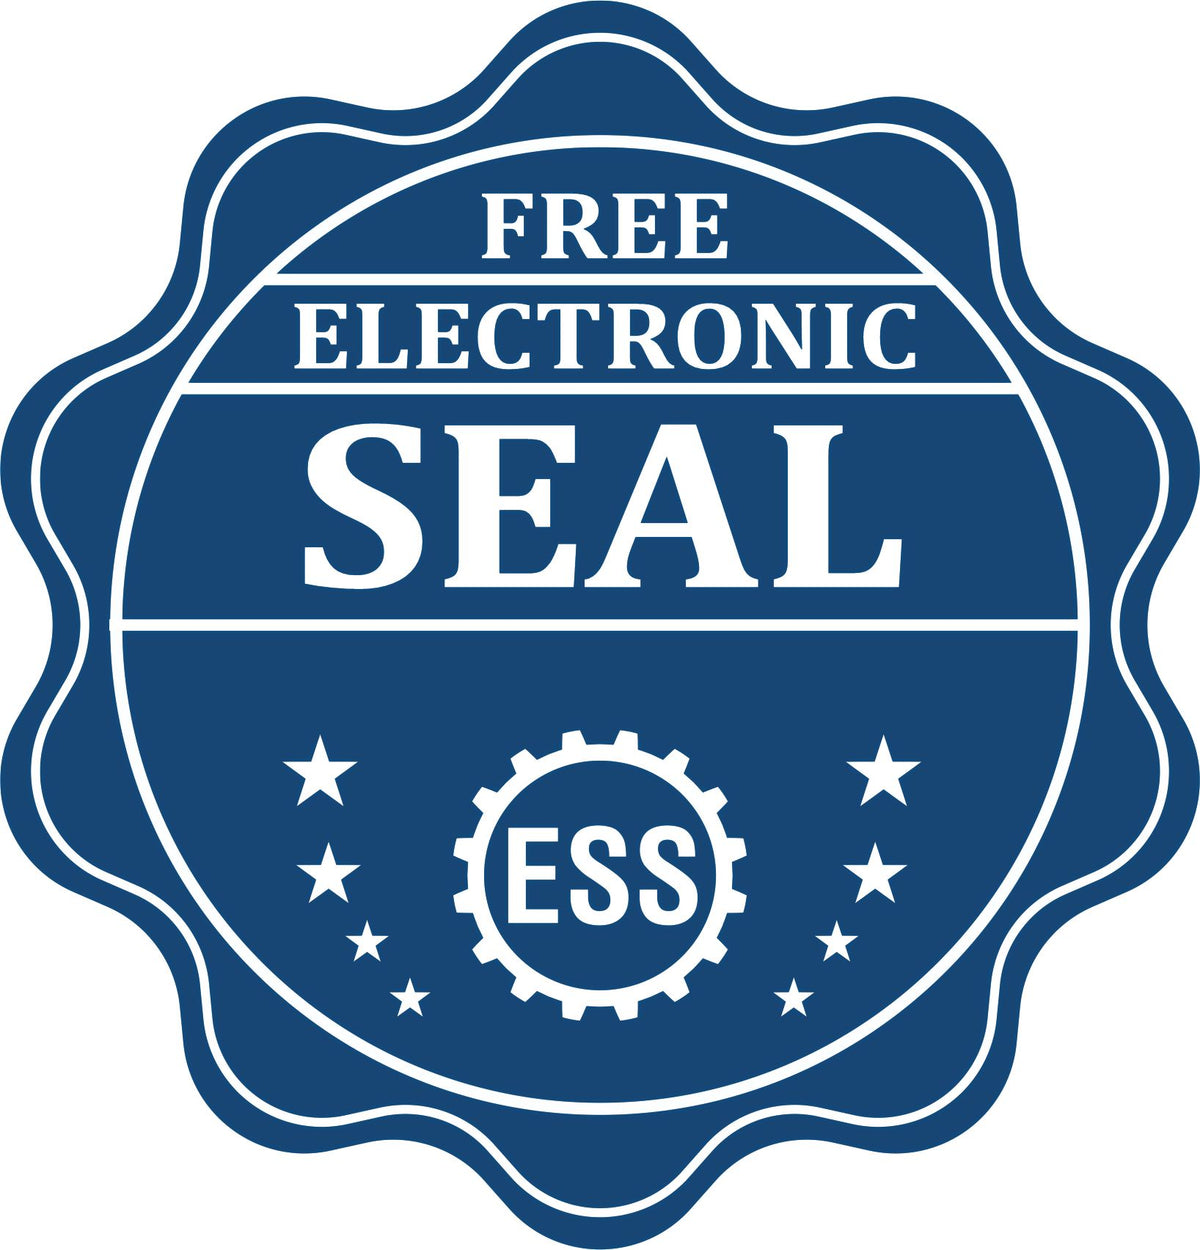 A badge showing a free electronic seal for the Wooden Handle Delaware State Seal Notary Public Stamp with stars and the ESS gear on the emblem.